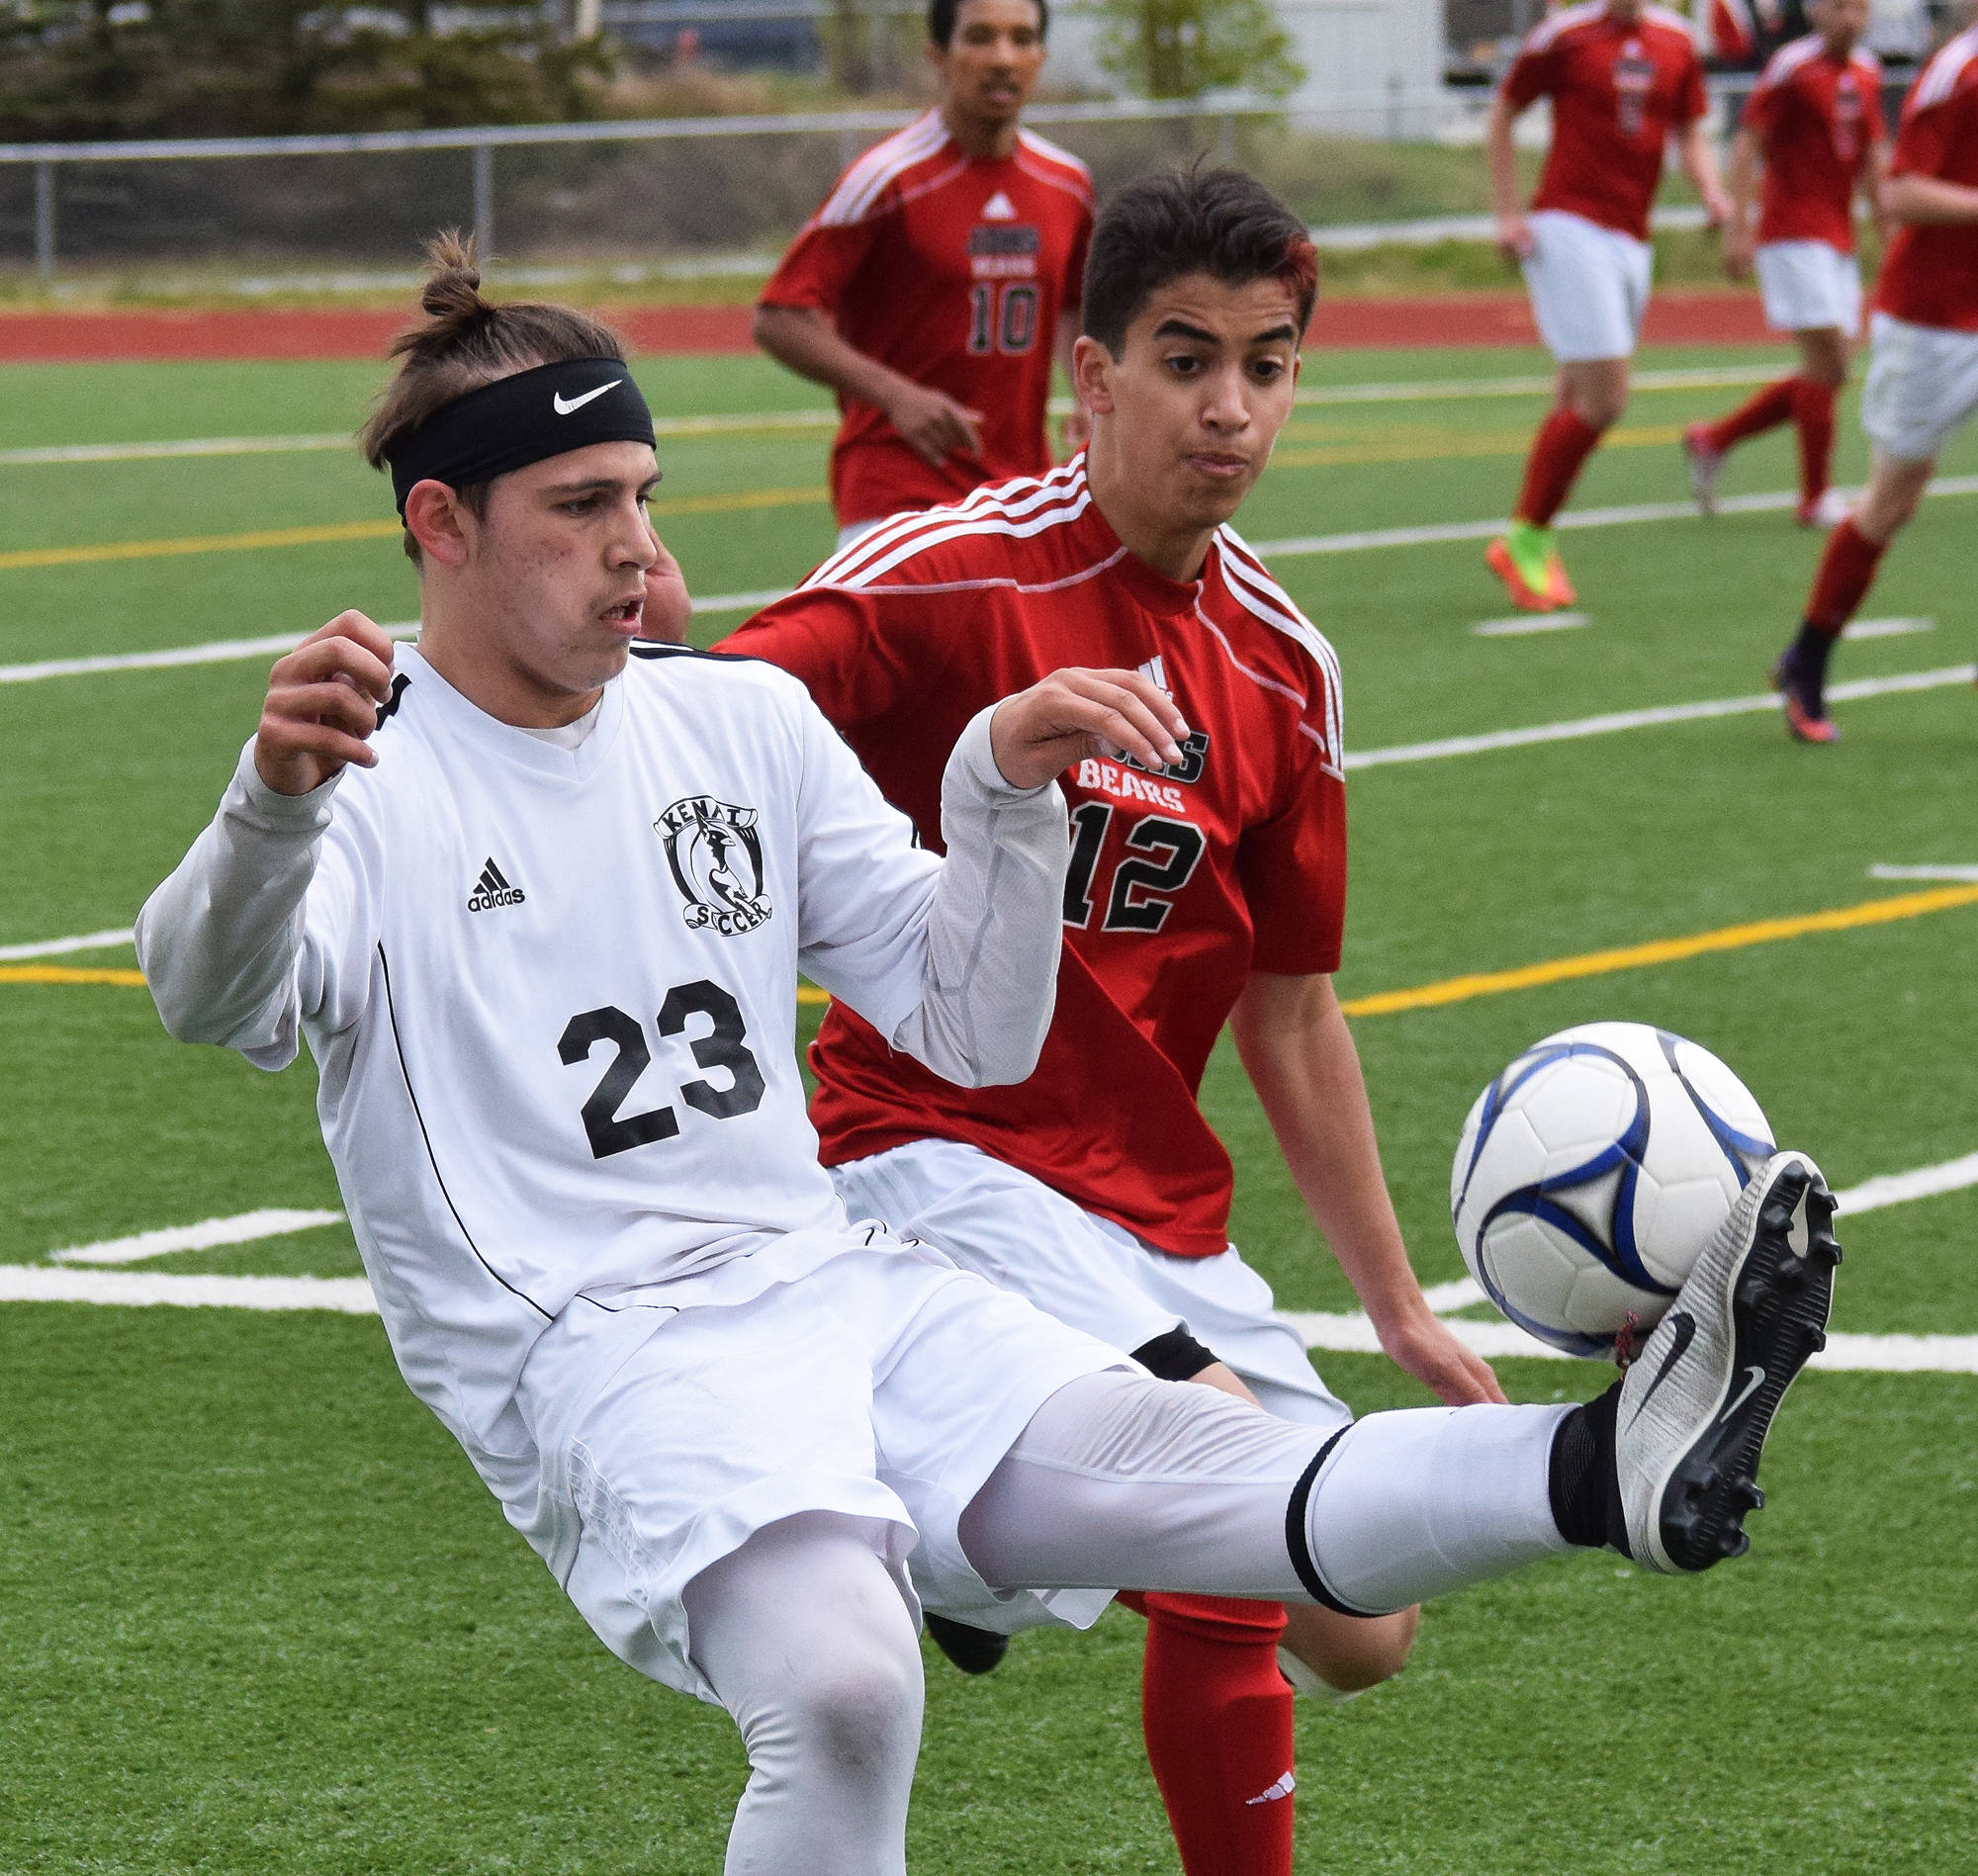 Kenai Central’s Zack Tuttle (23) keeps the ball away from Juneau-Douglas’ Salar Peirovi in a state soccer tournament quarterfinal Thursday at Eagle River High School. (Photo by Joey Klecka/Peninsula Clarion)